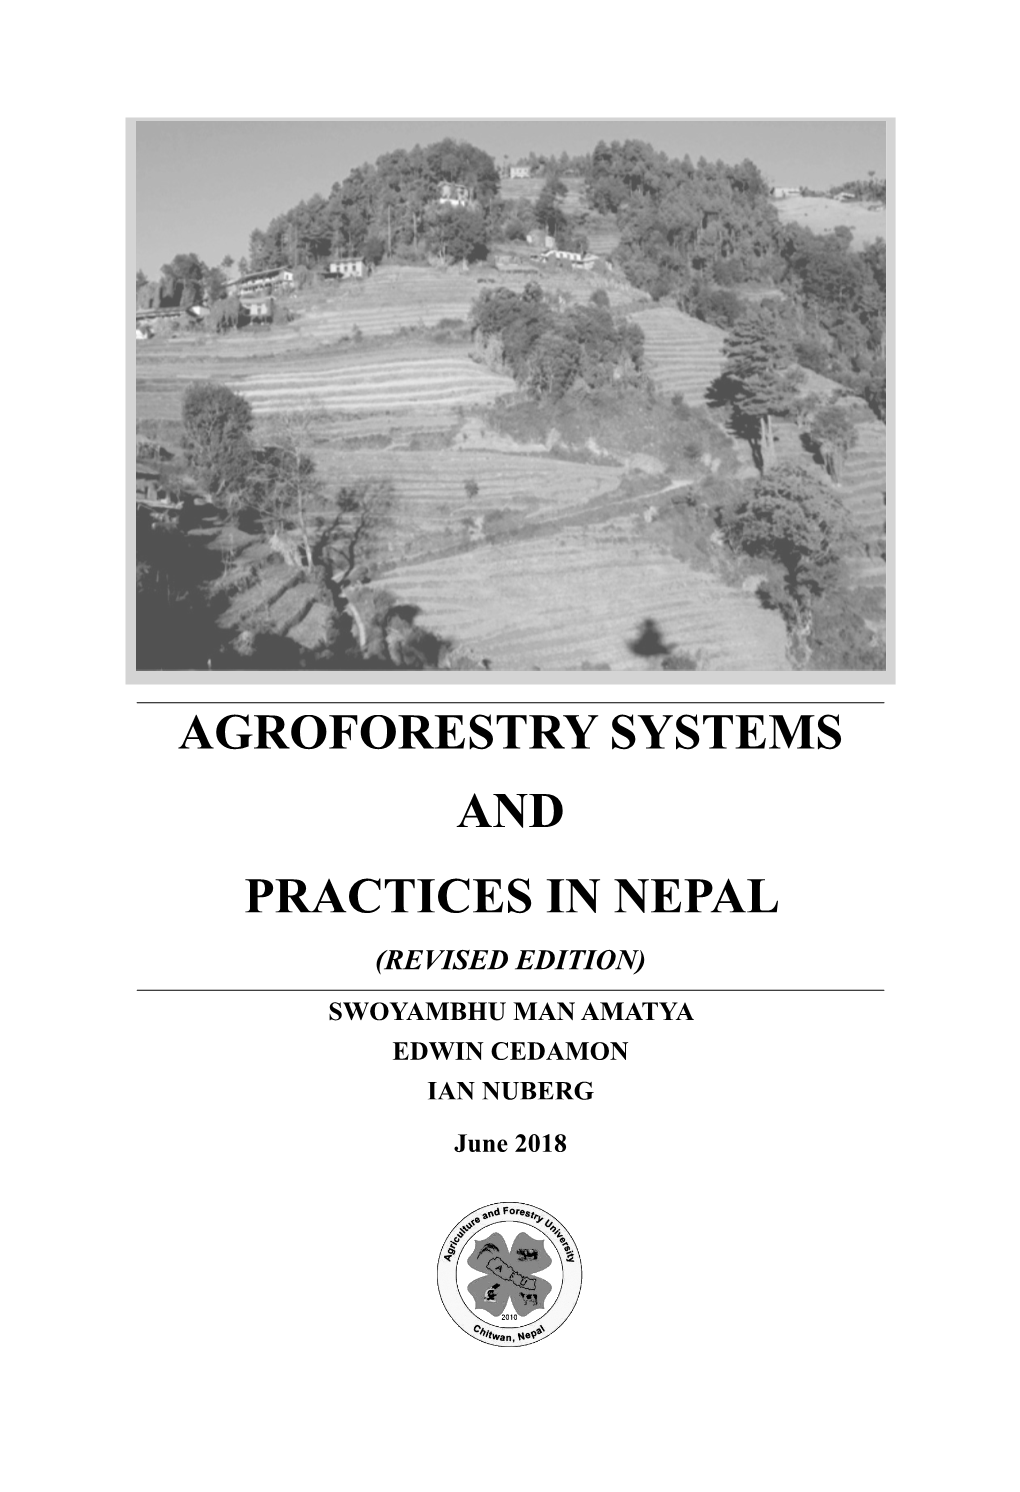 Agroforestry Systems and Practices in Nepal